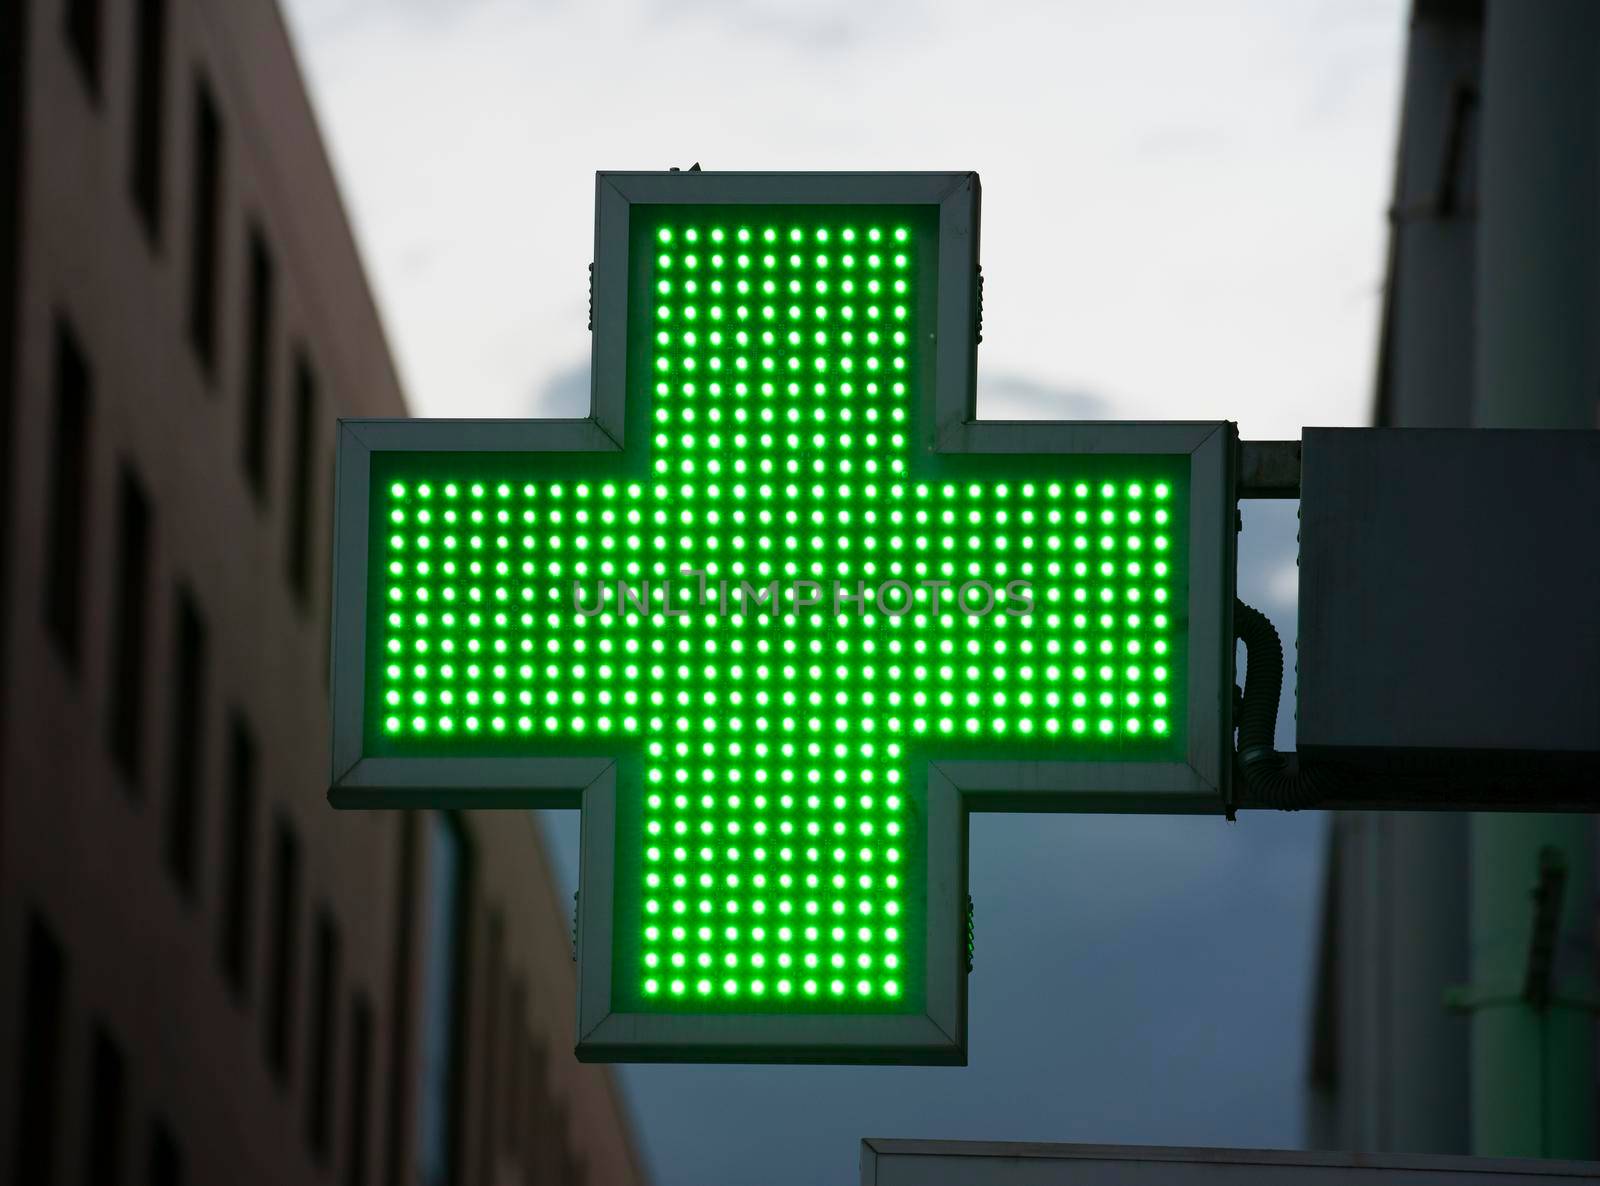 Pharmacy sign in Spain green neon attached to wall.